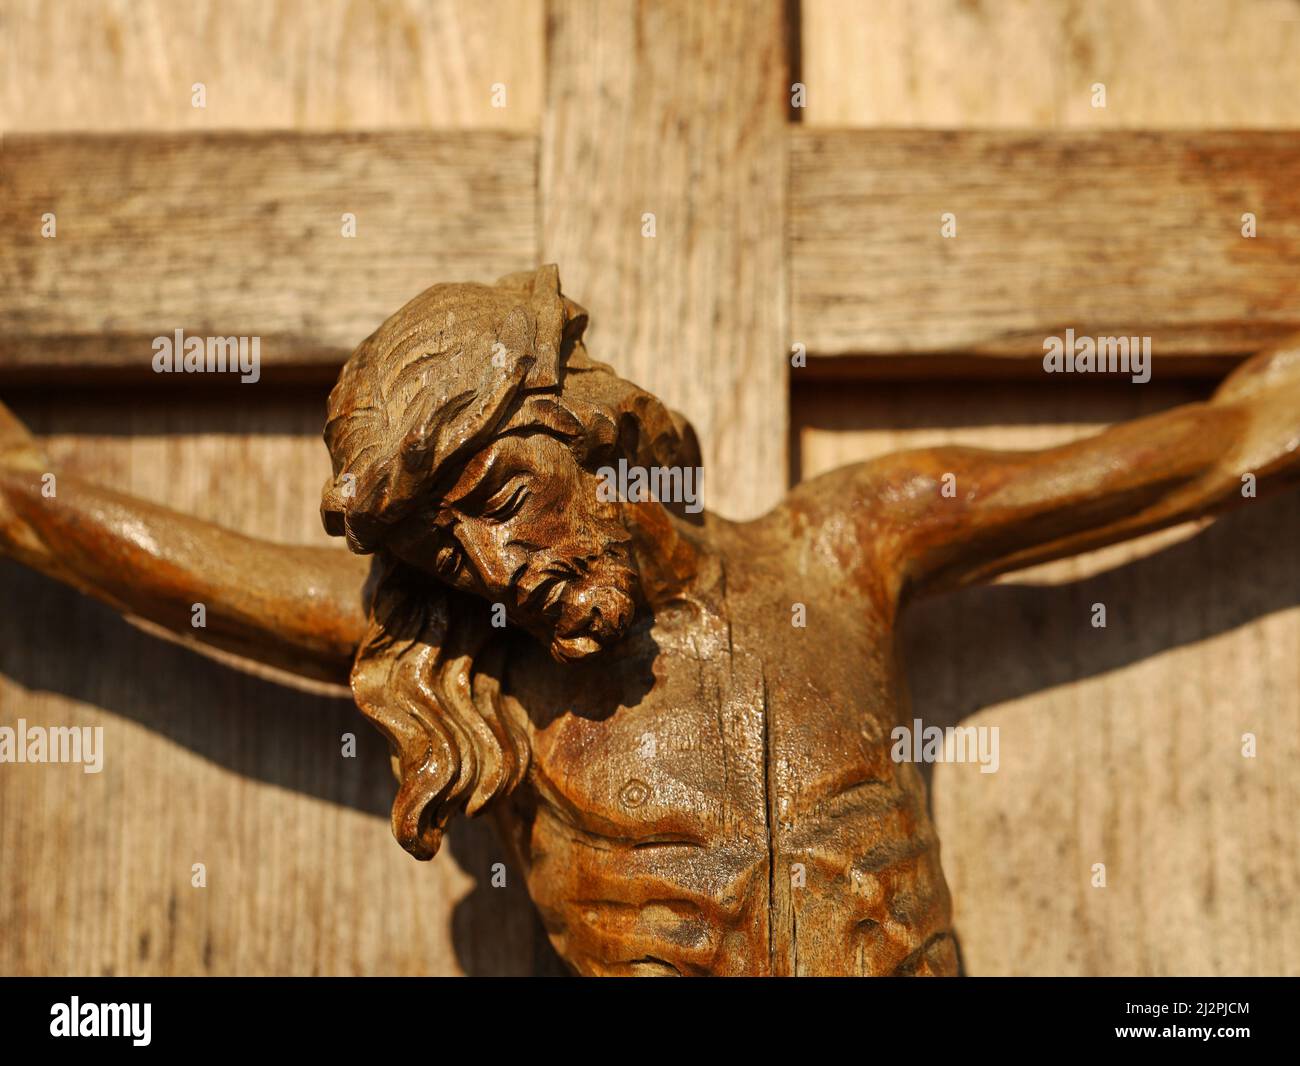 Close up of an old wooden crucifix, face of Jesus Christ on wooden cross in sunlight Stock Photo